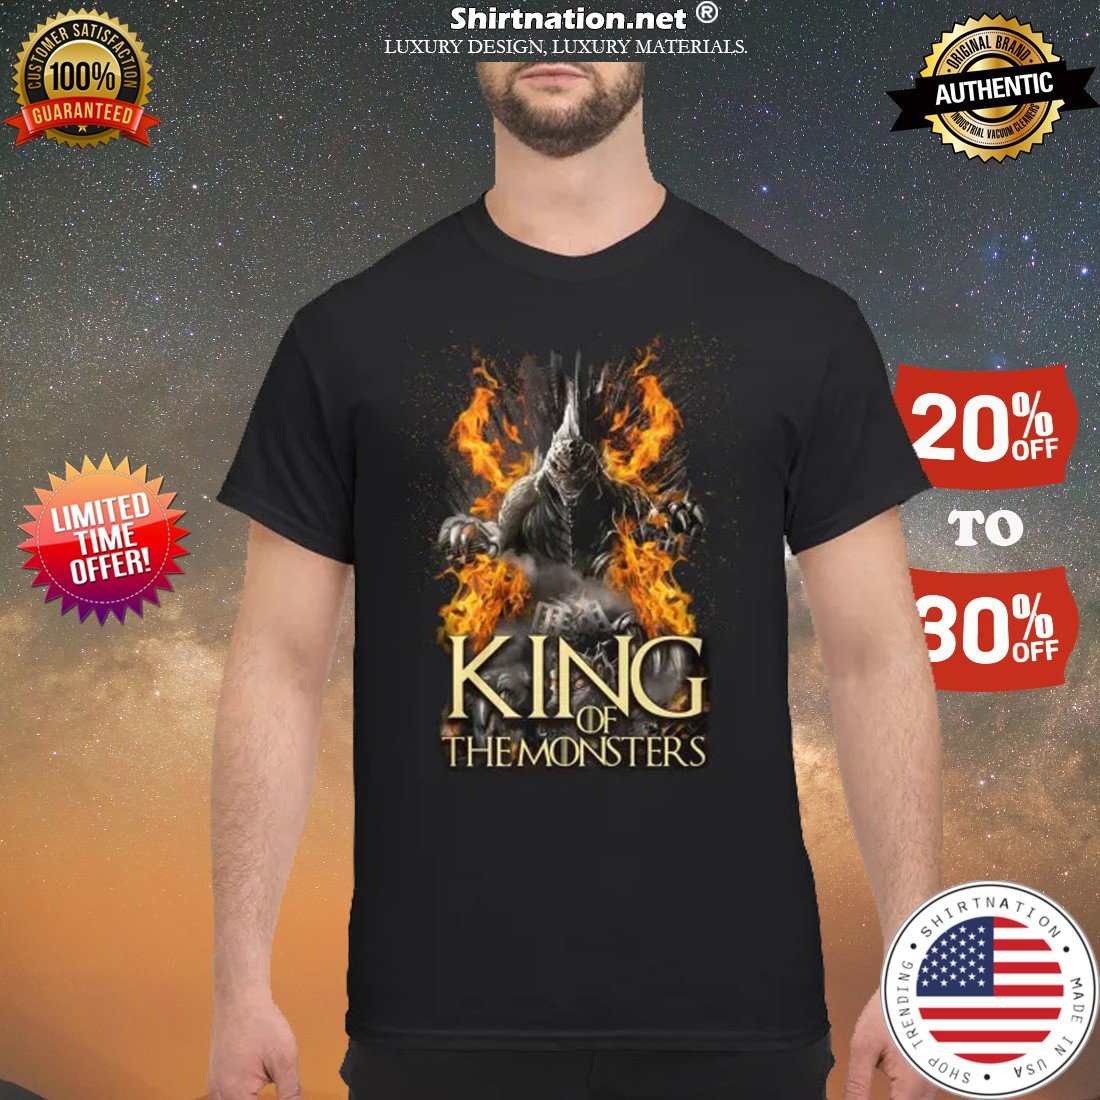 king of the monsters shirt